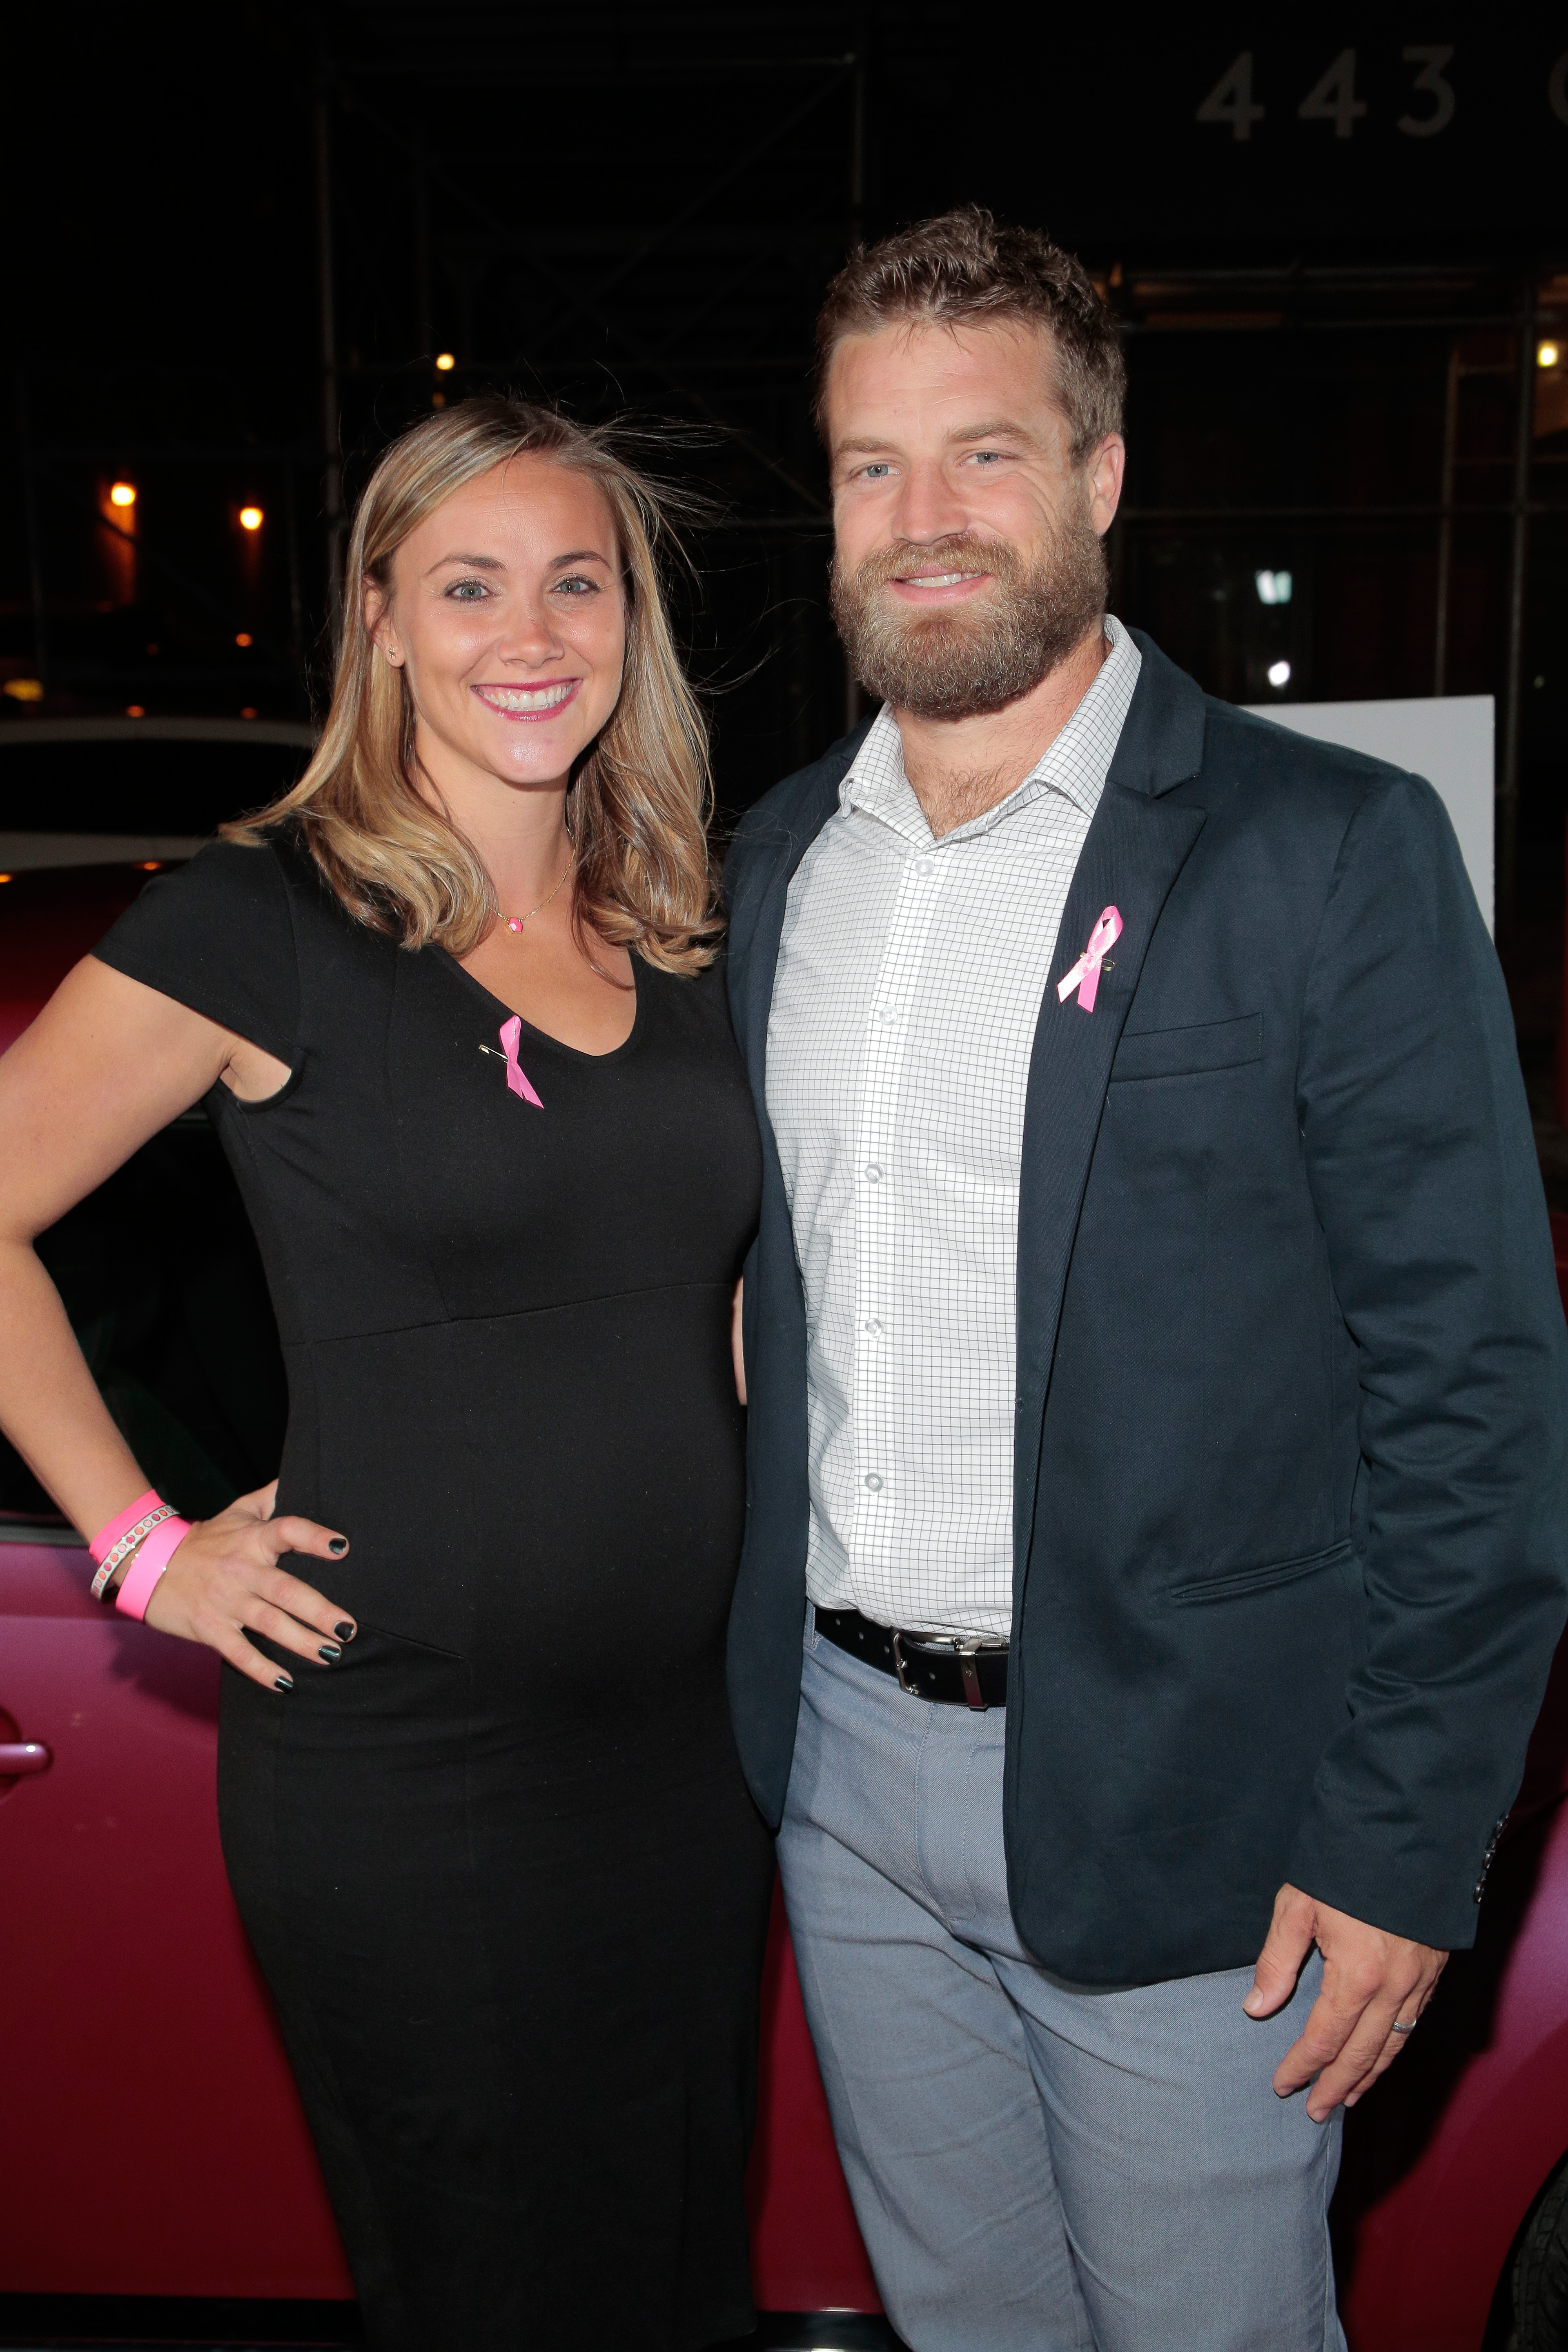 Liza Barber and Ryan Fitzpatrick pose outside during The Pink Agenda Gala on October 13, 2016, in New York City | Source: Getty Images